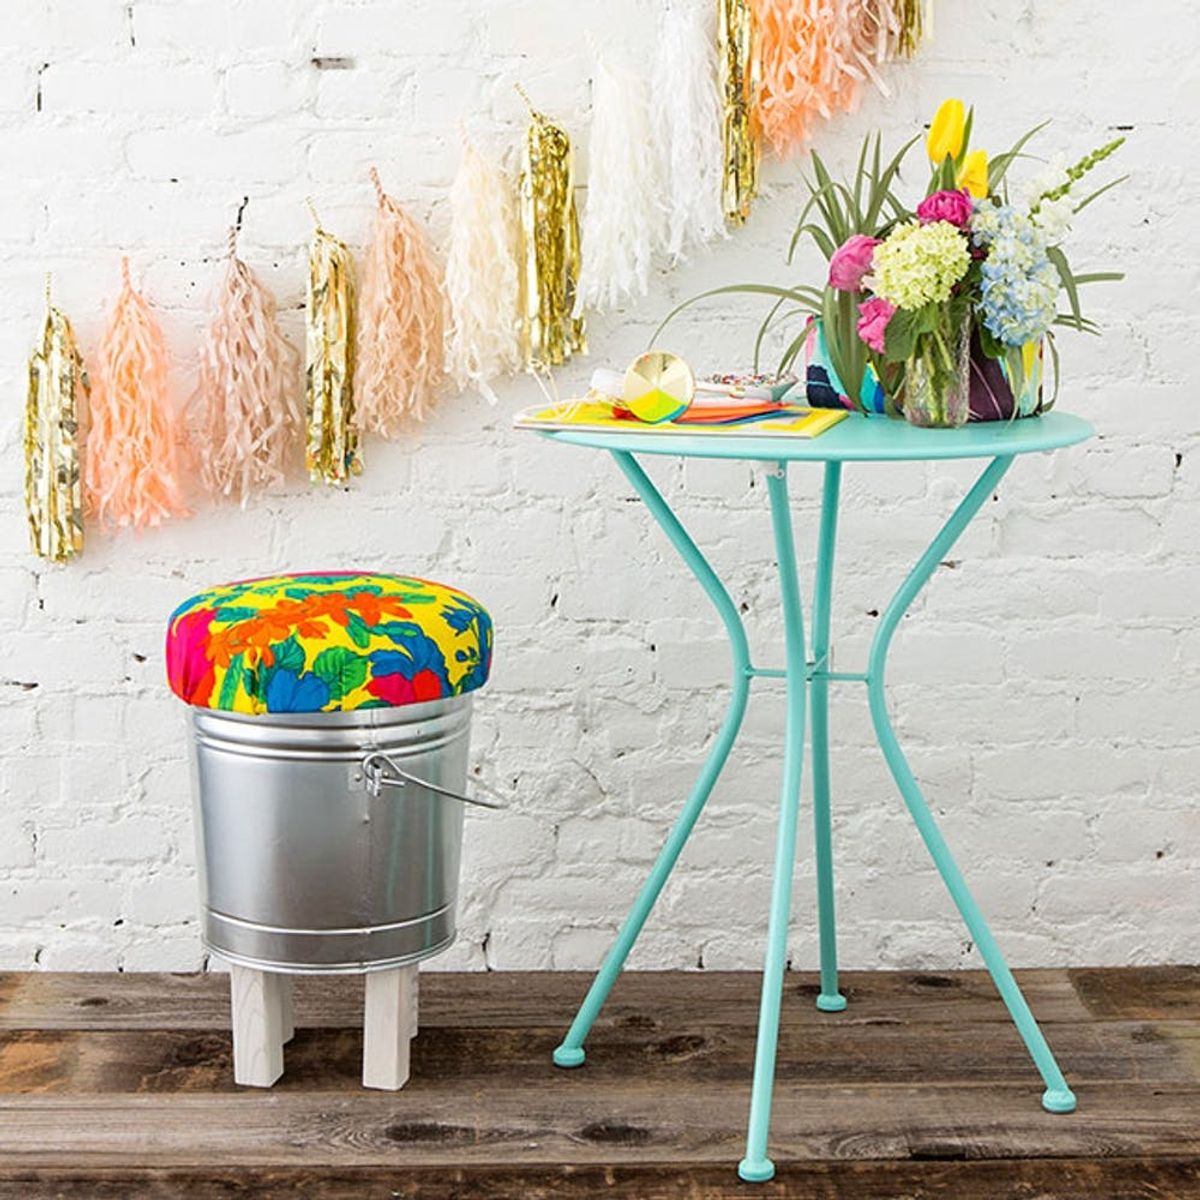 Glam Up Your She Shed With This Stool Hack